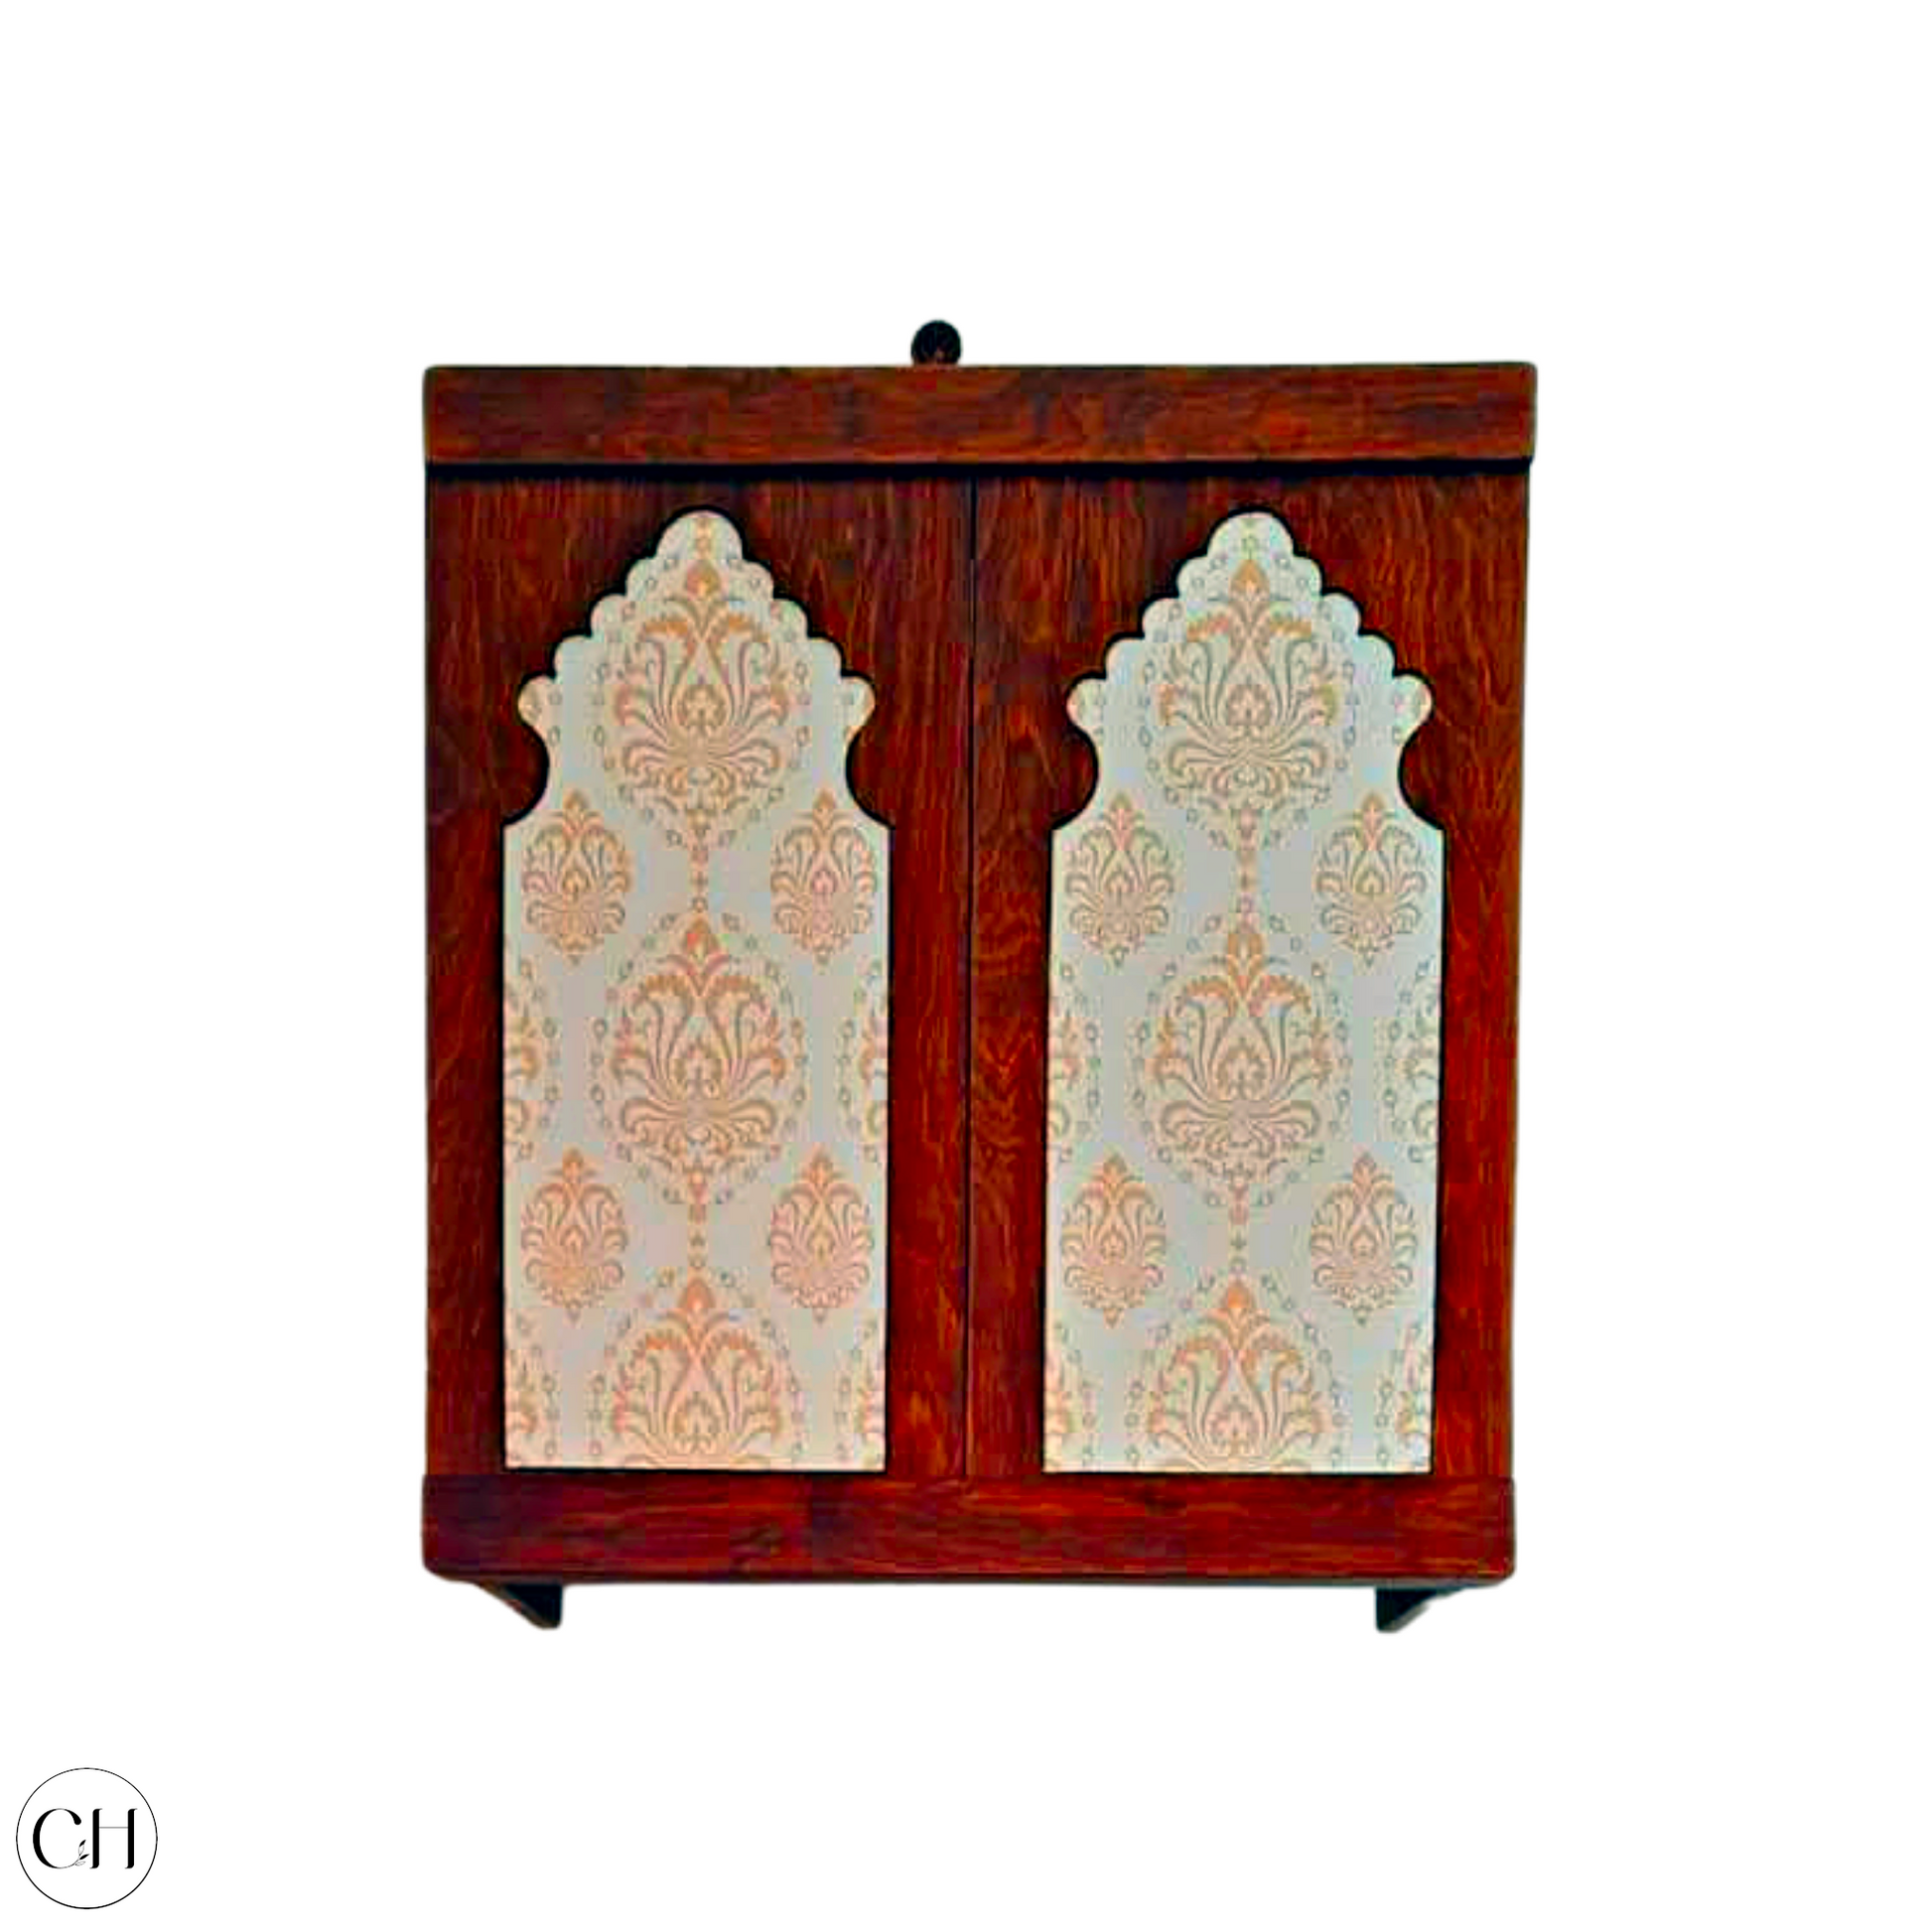 CustHum-Bhakti-compact wallmounted puja unit with traditional Indian motif on doors